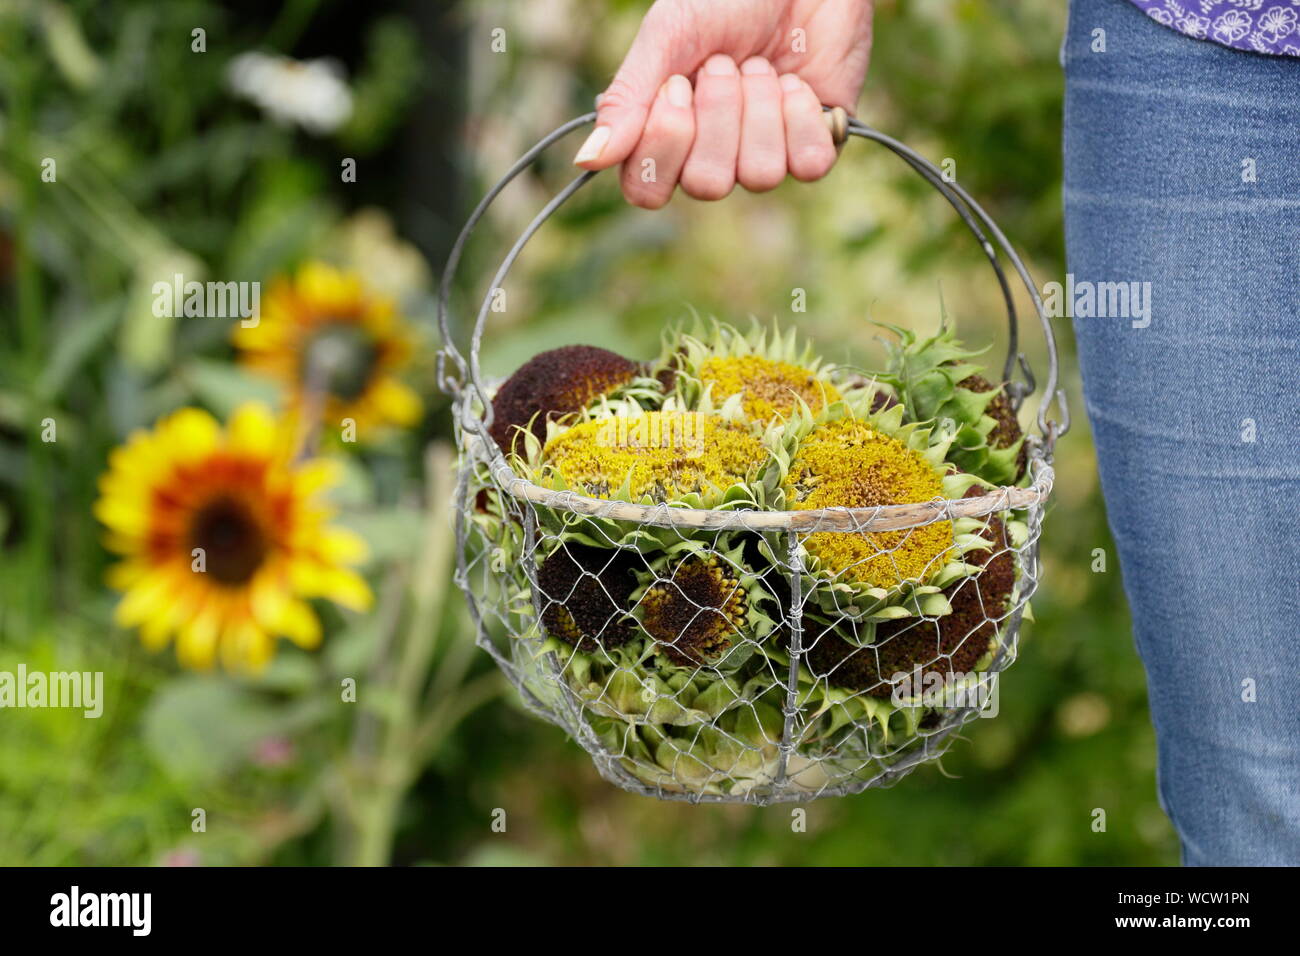 Helianthus annuus. Sunflower seedheads carried by female gardener in a basket for drying. UK domestic garden Stock Photo